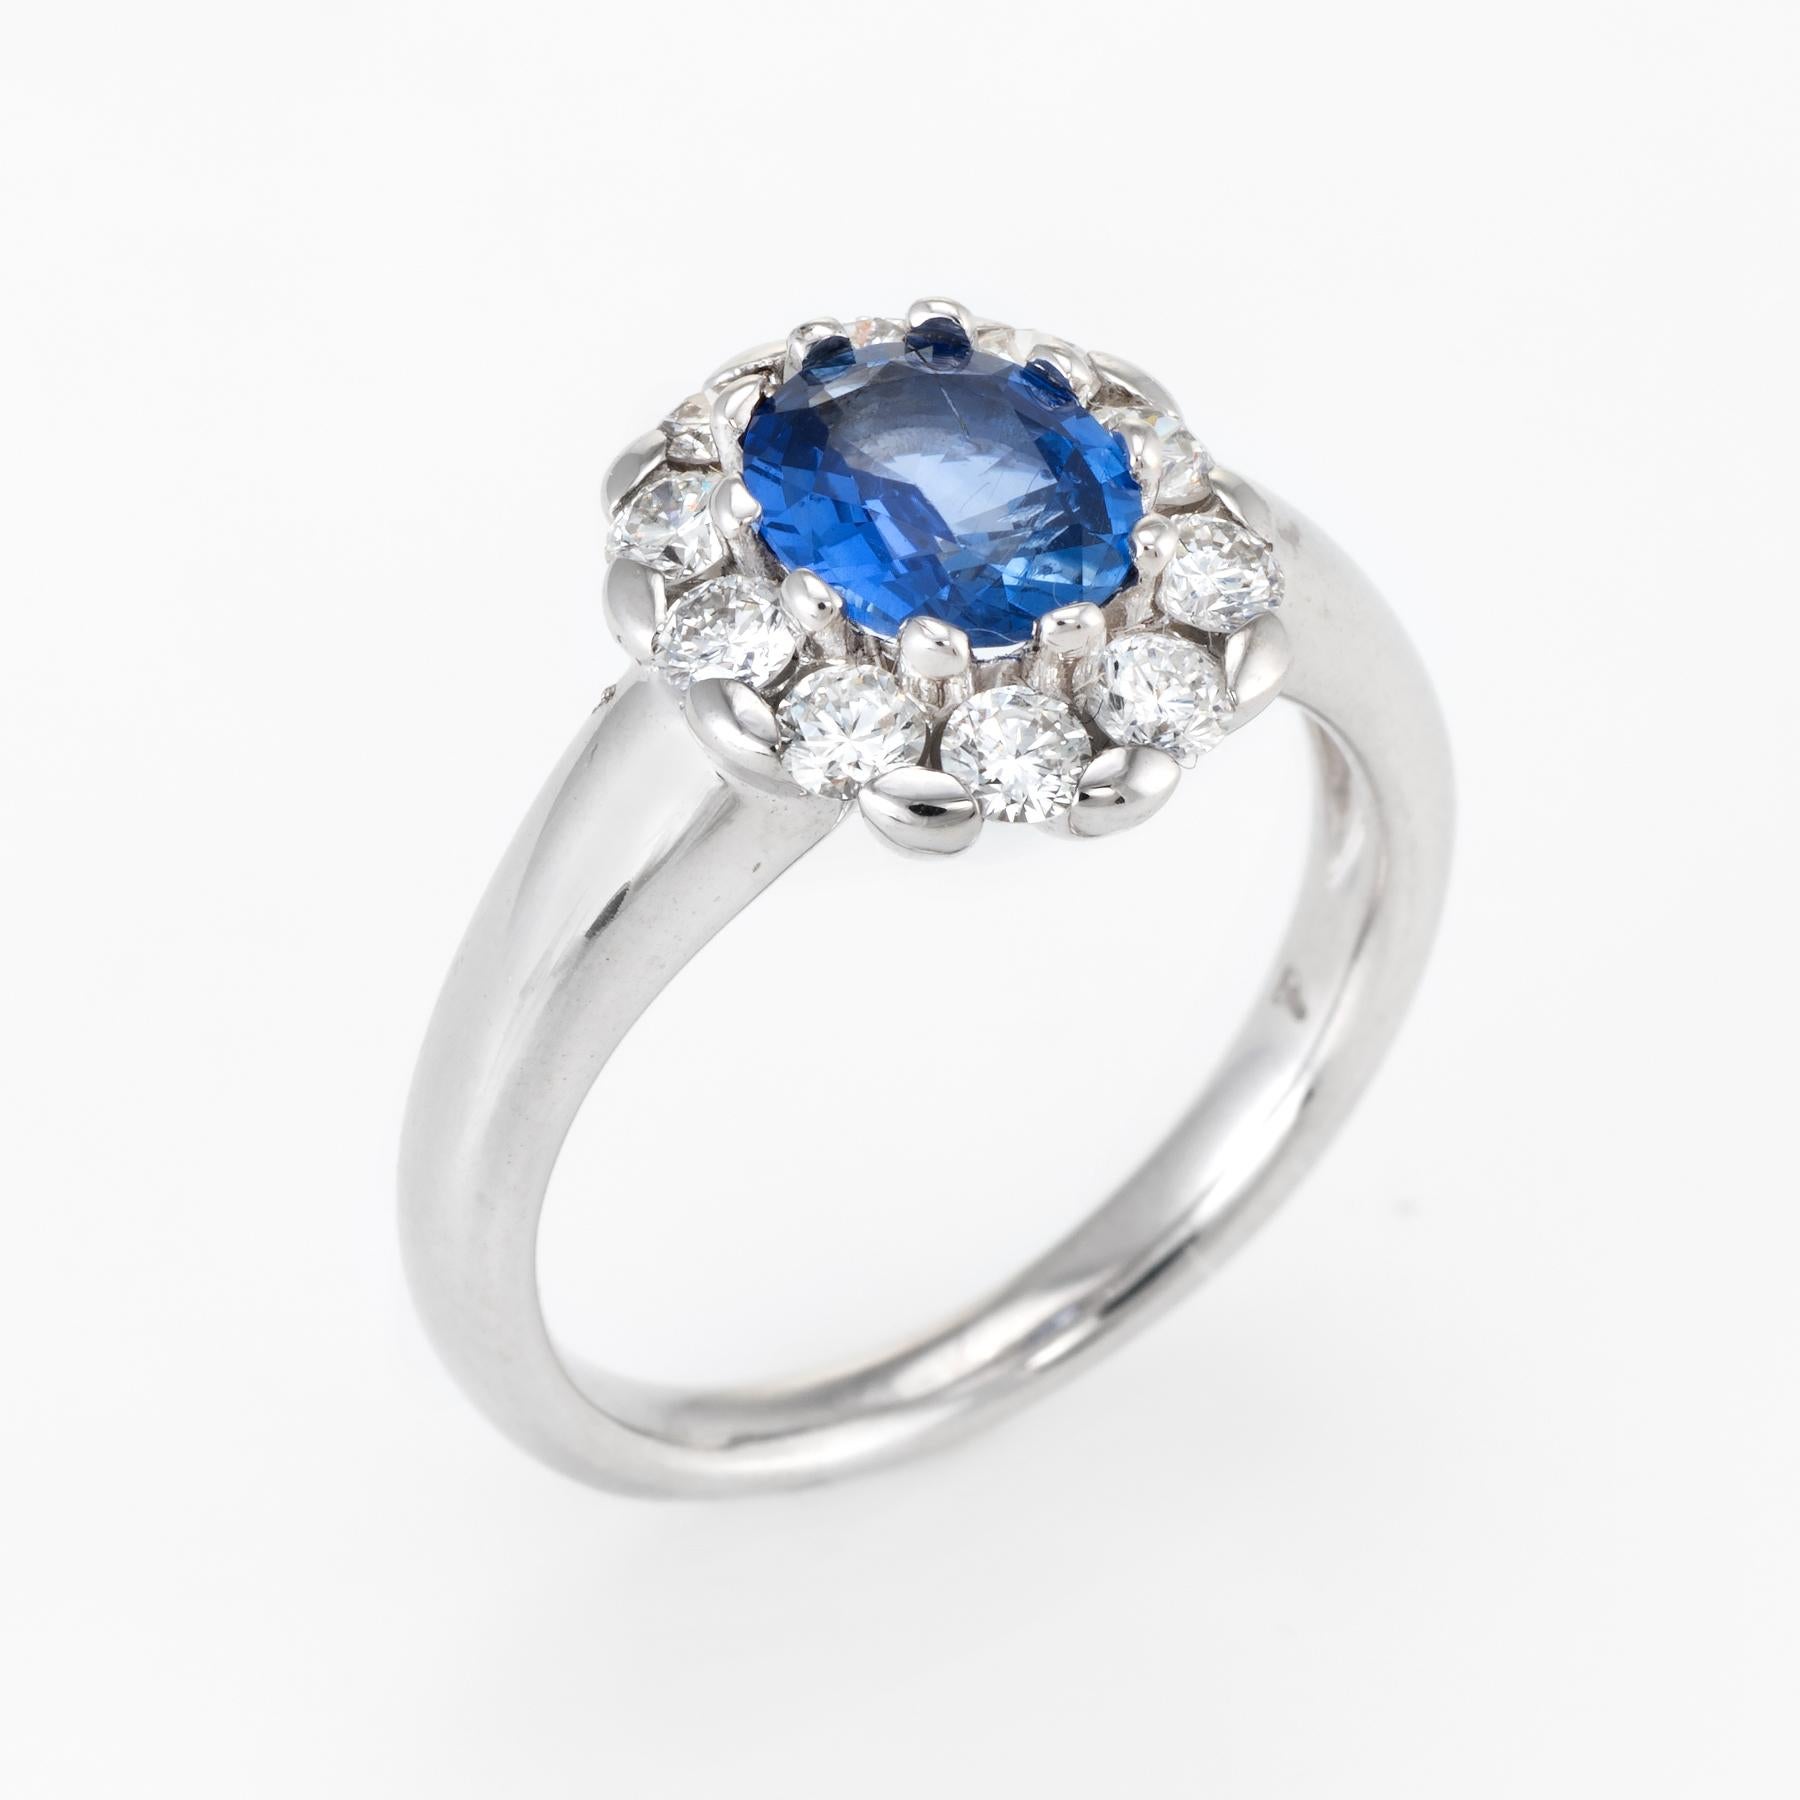 Elegant vintage princess ring, crafted in 18 karat white gold. 

Centrally mounted faceted oval cut sapphire measures 8mm x 7mm (estimated at 1.10 carats), accented with an estimated 0.85 carats of diamonds (estimated at G-H color VS2 clarity). The